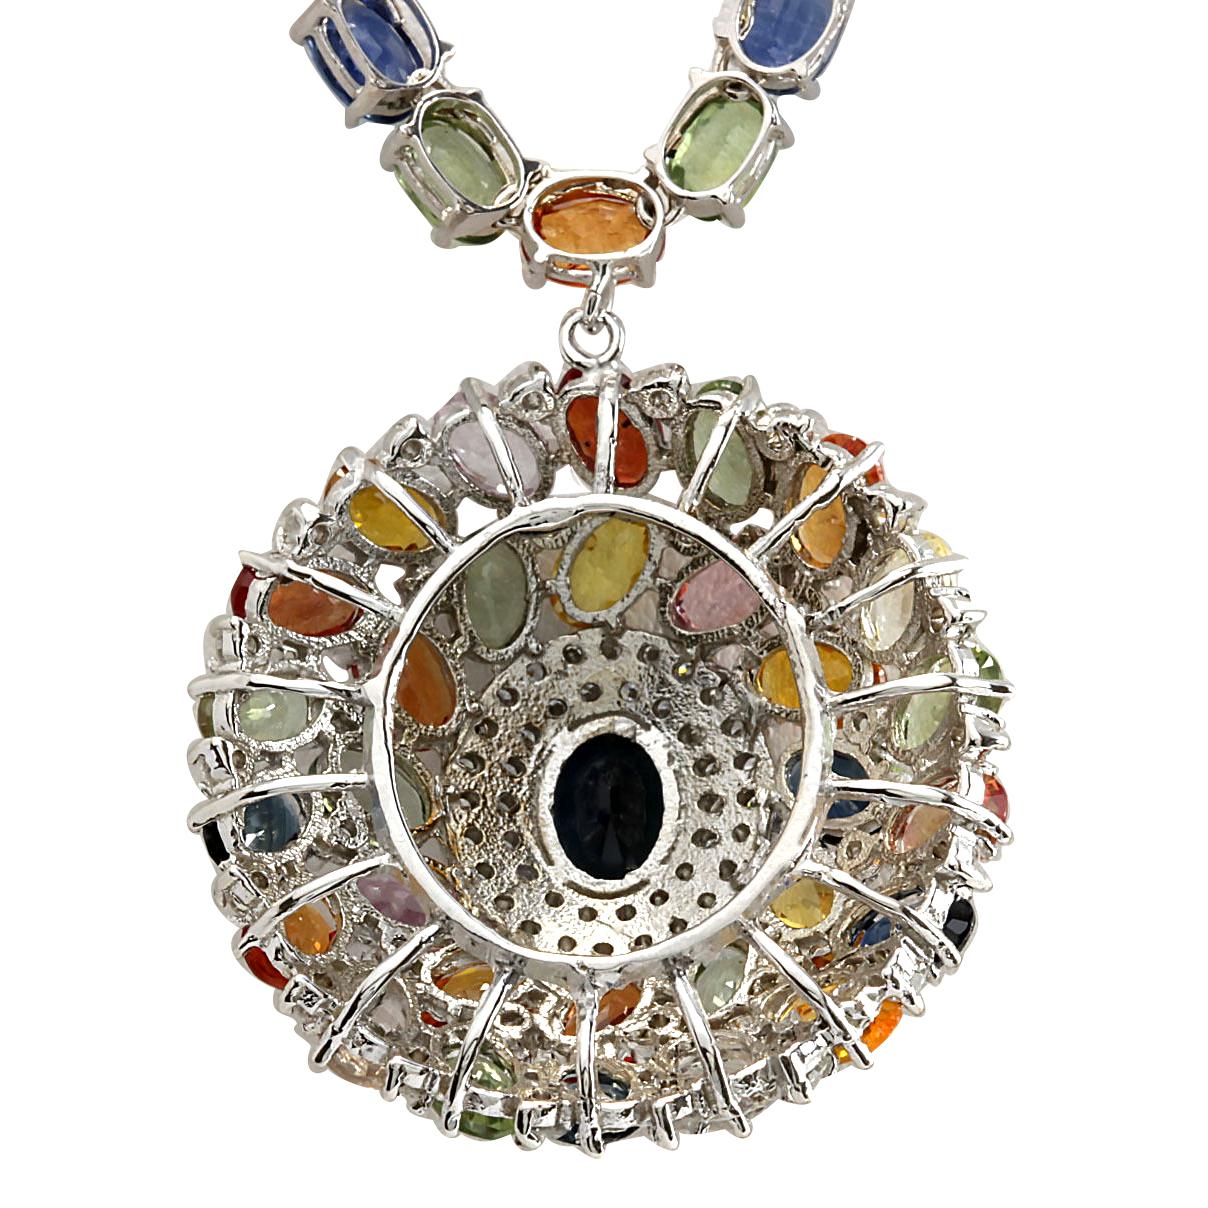 Stamped: 14K White Gold
Total Necklace Weight: 28.3 Grams
Necklace Length: 17 Inches
Total Natural Sapphire Weight is 1.90 Carat (Measures: 8.00x6.00 mm)
Color: Blue
Total Natural Sapphire Weight is 53.00 Carat
Color: Multicolor
Diamond Weight: